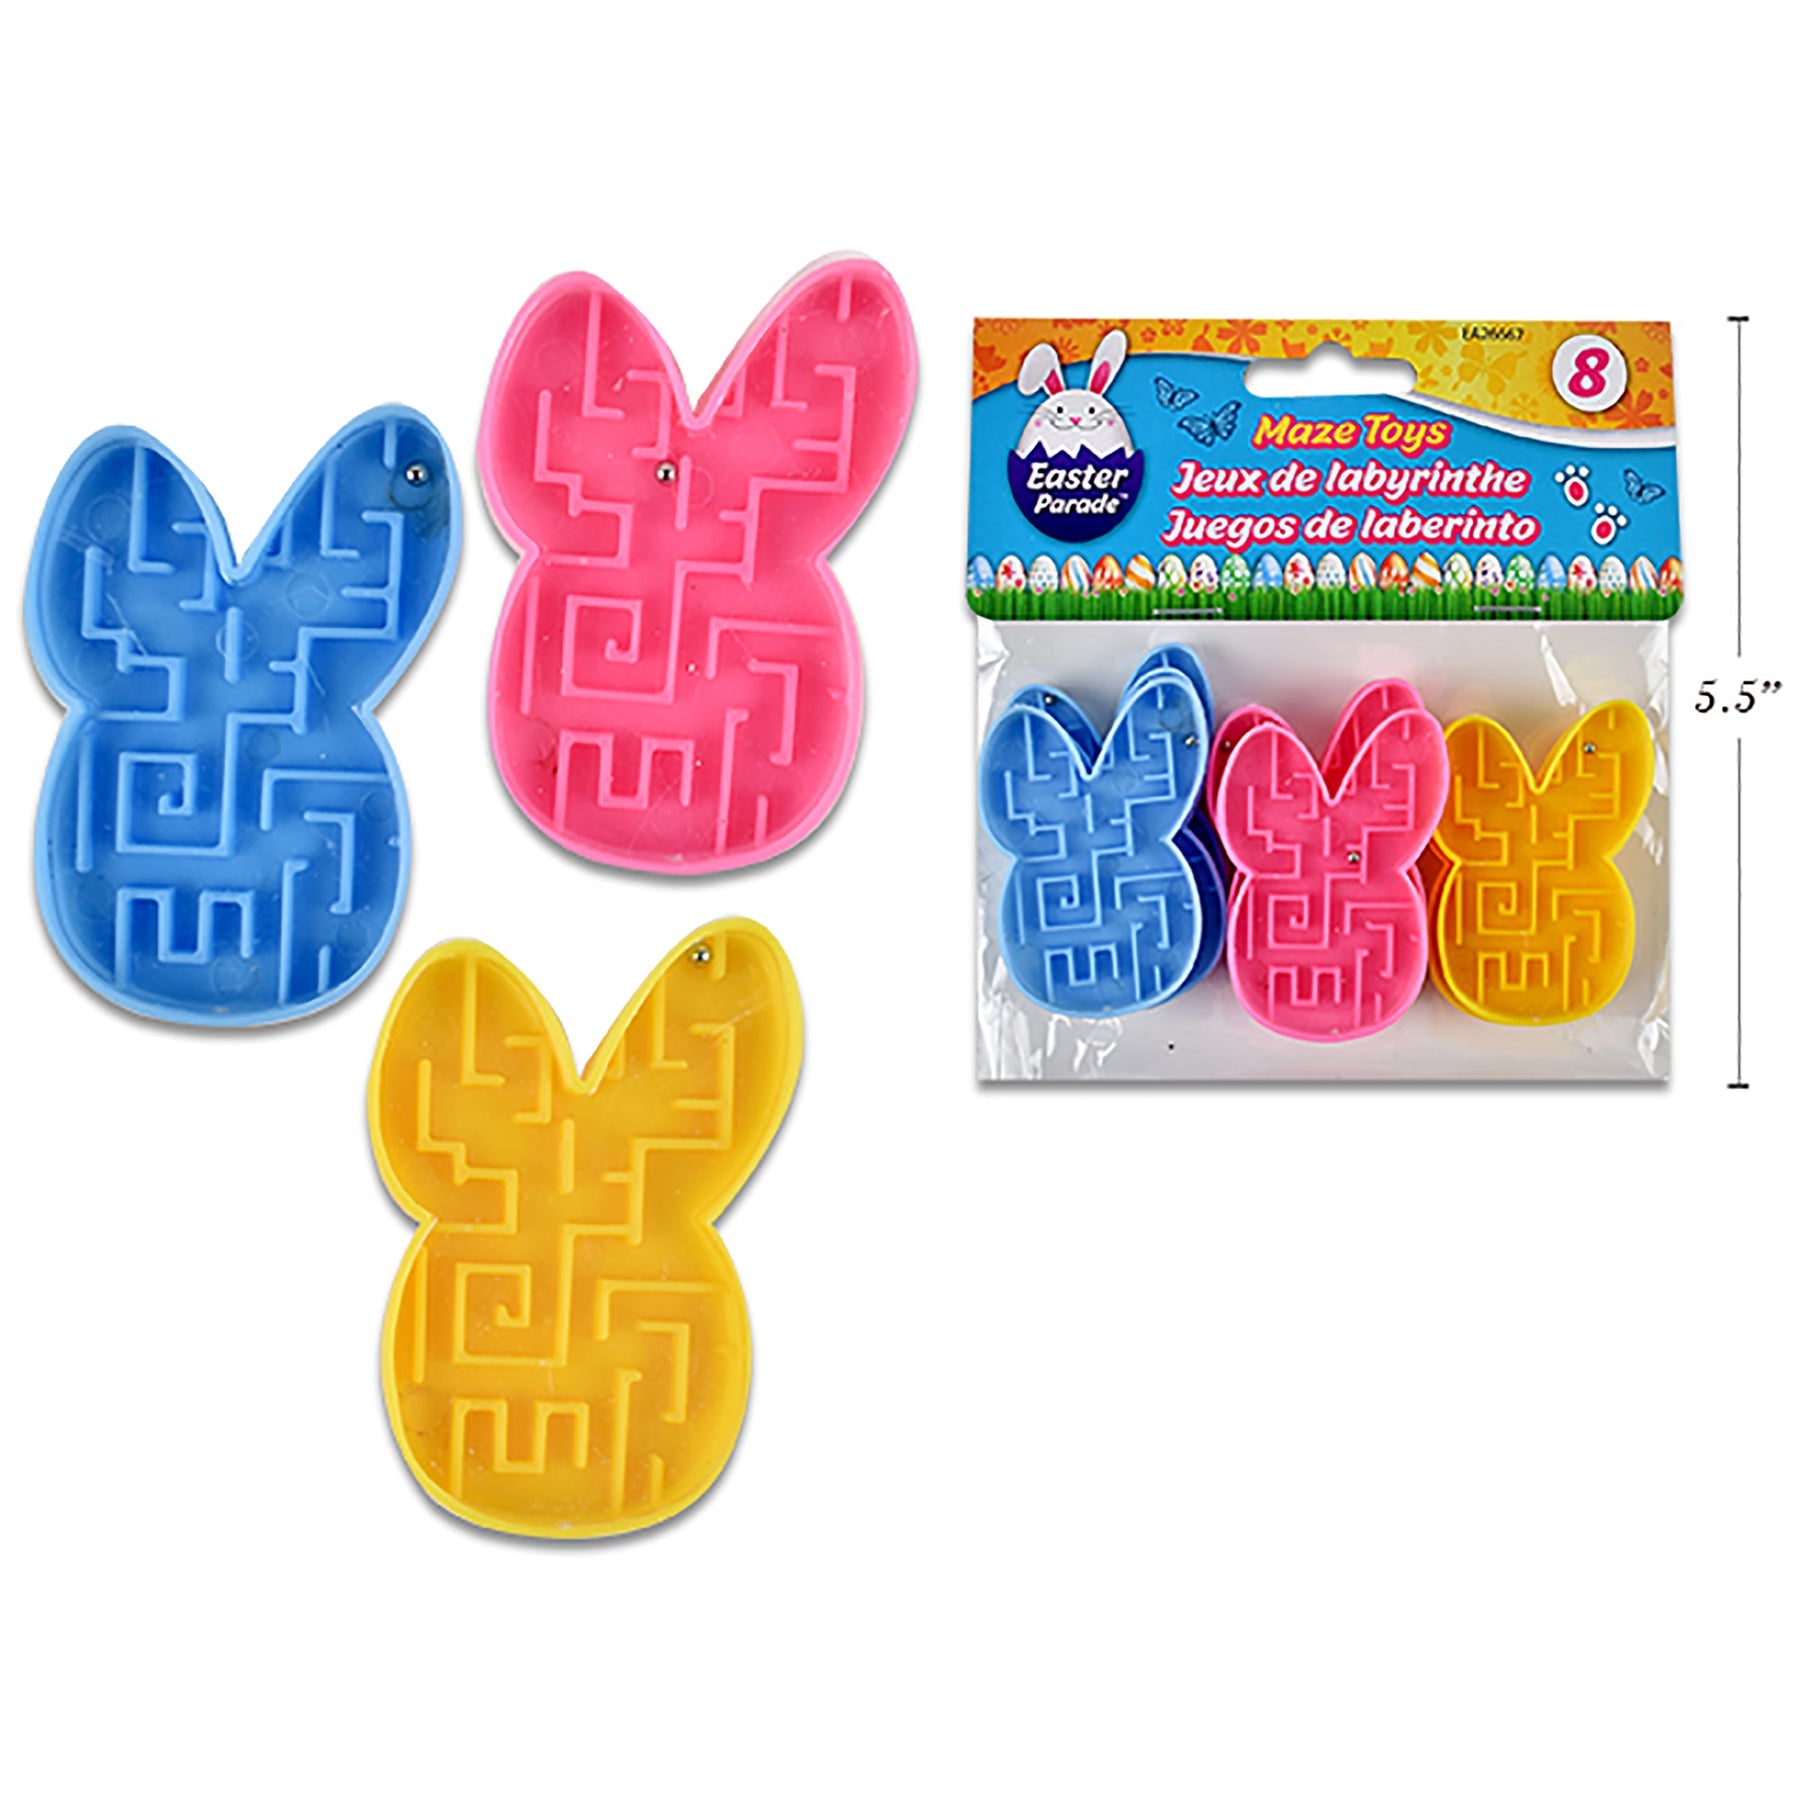 Easter 8 Bunny Mazes Toys